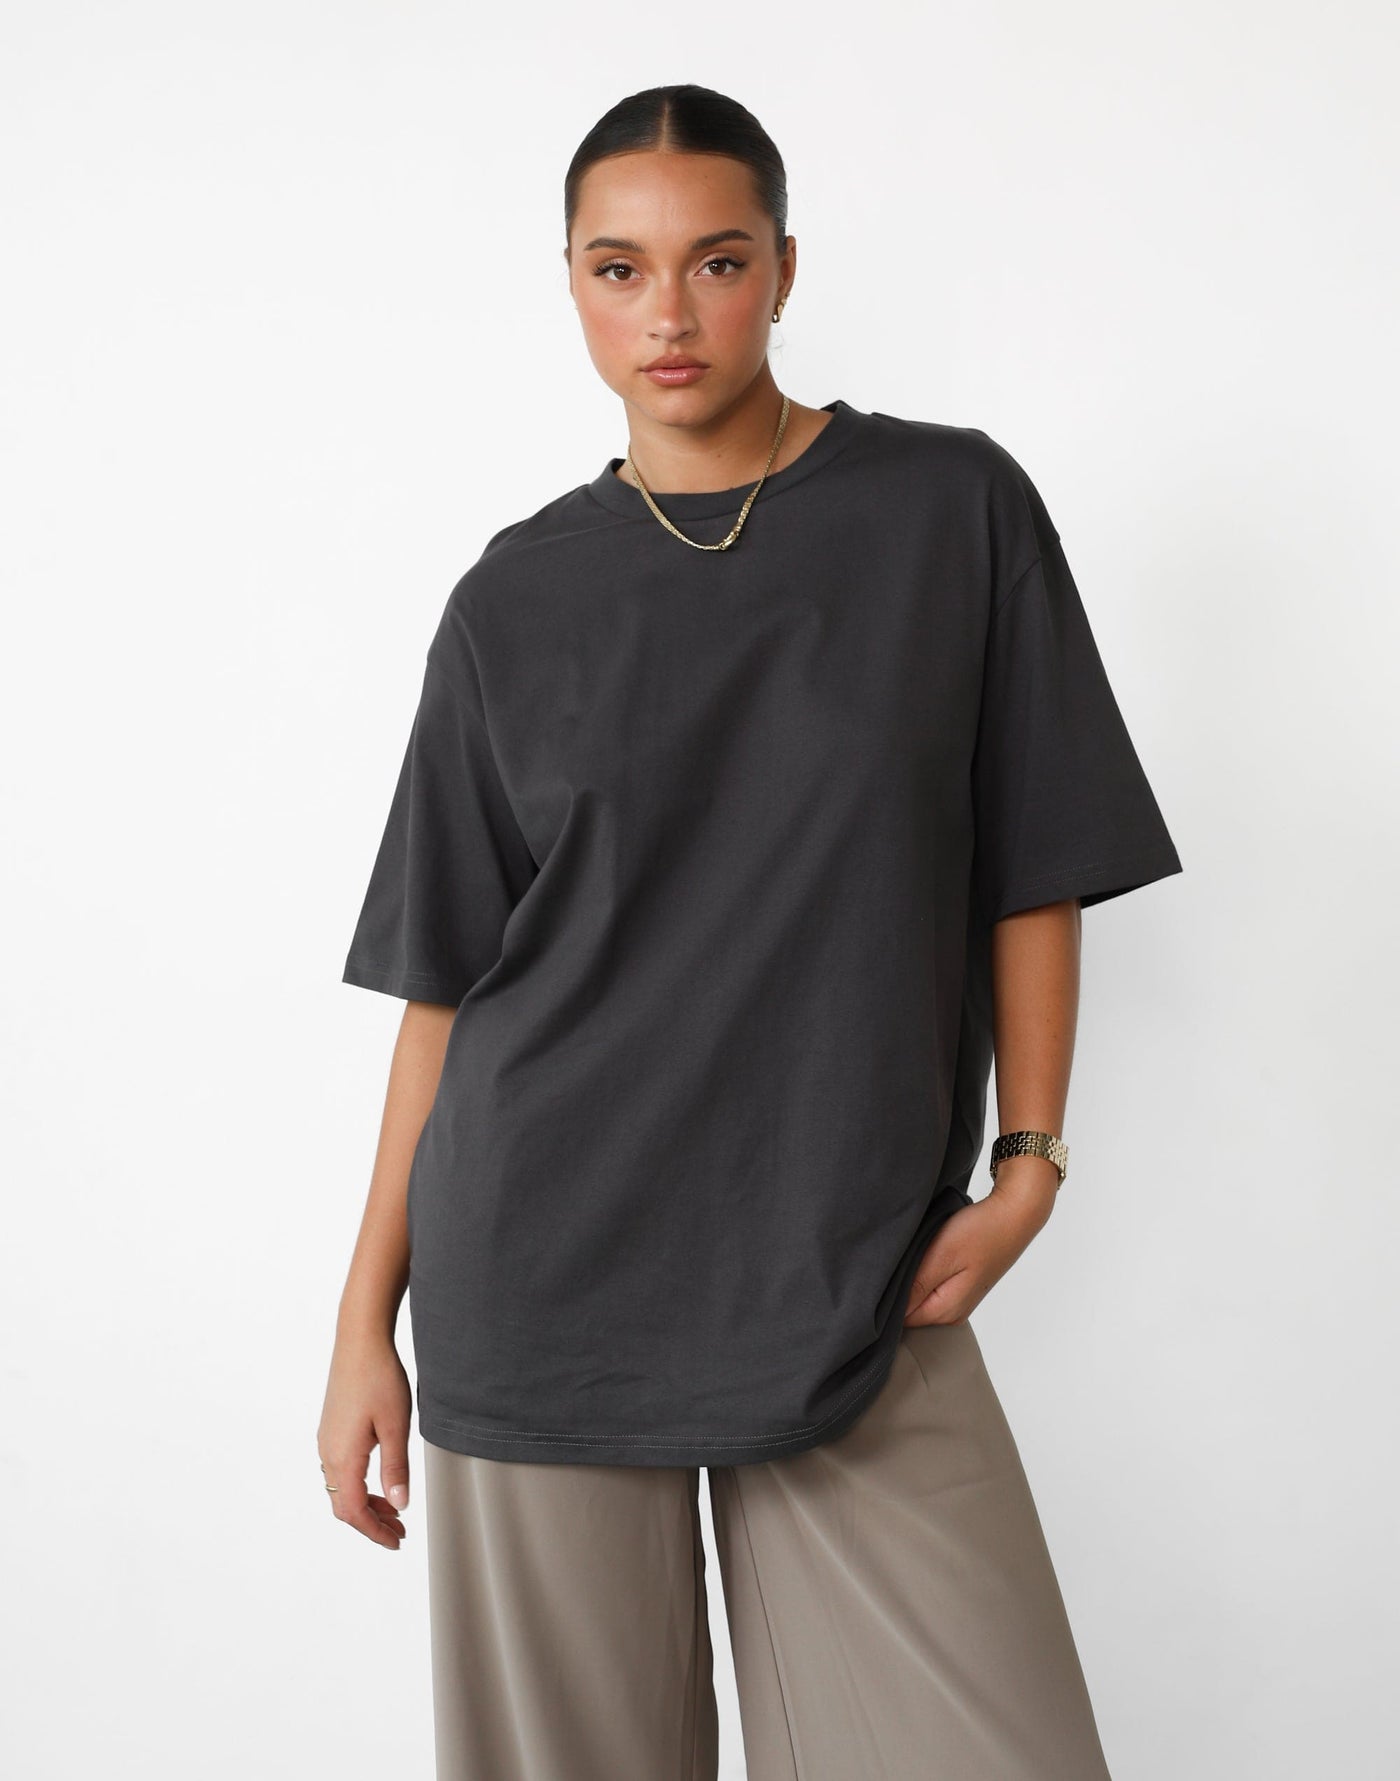 Luca Oversized Tee (Slate) - Relaxed Oversized T-Shirt - Women's Top - Charcoal Clothing